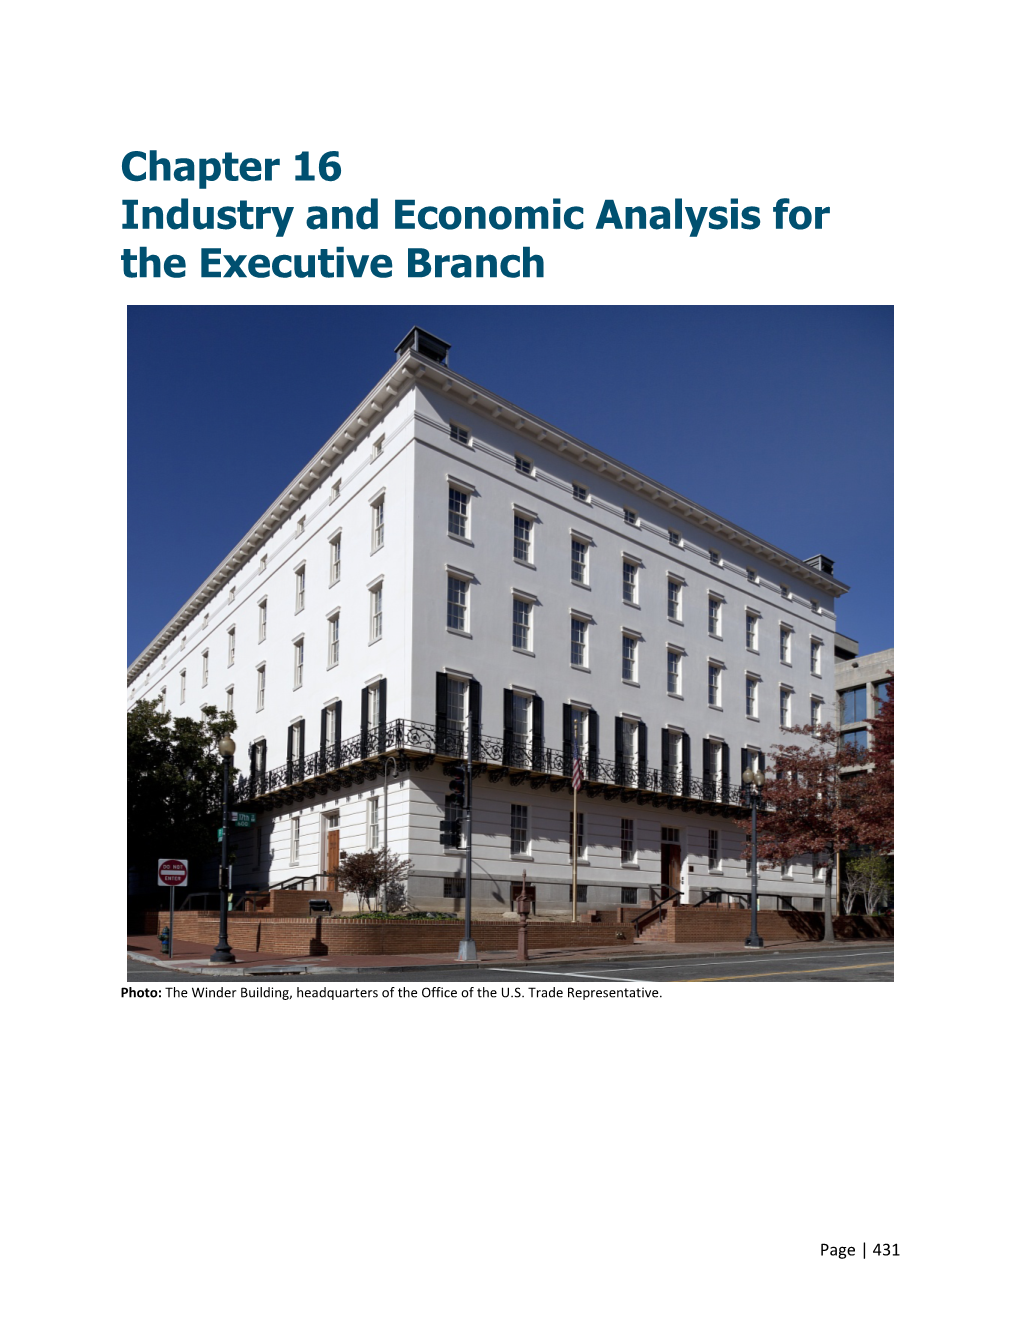 Chapter 16 Industry and Economic Analysis for the Executive Branch